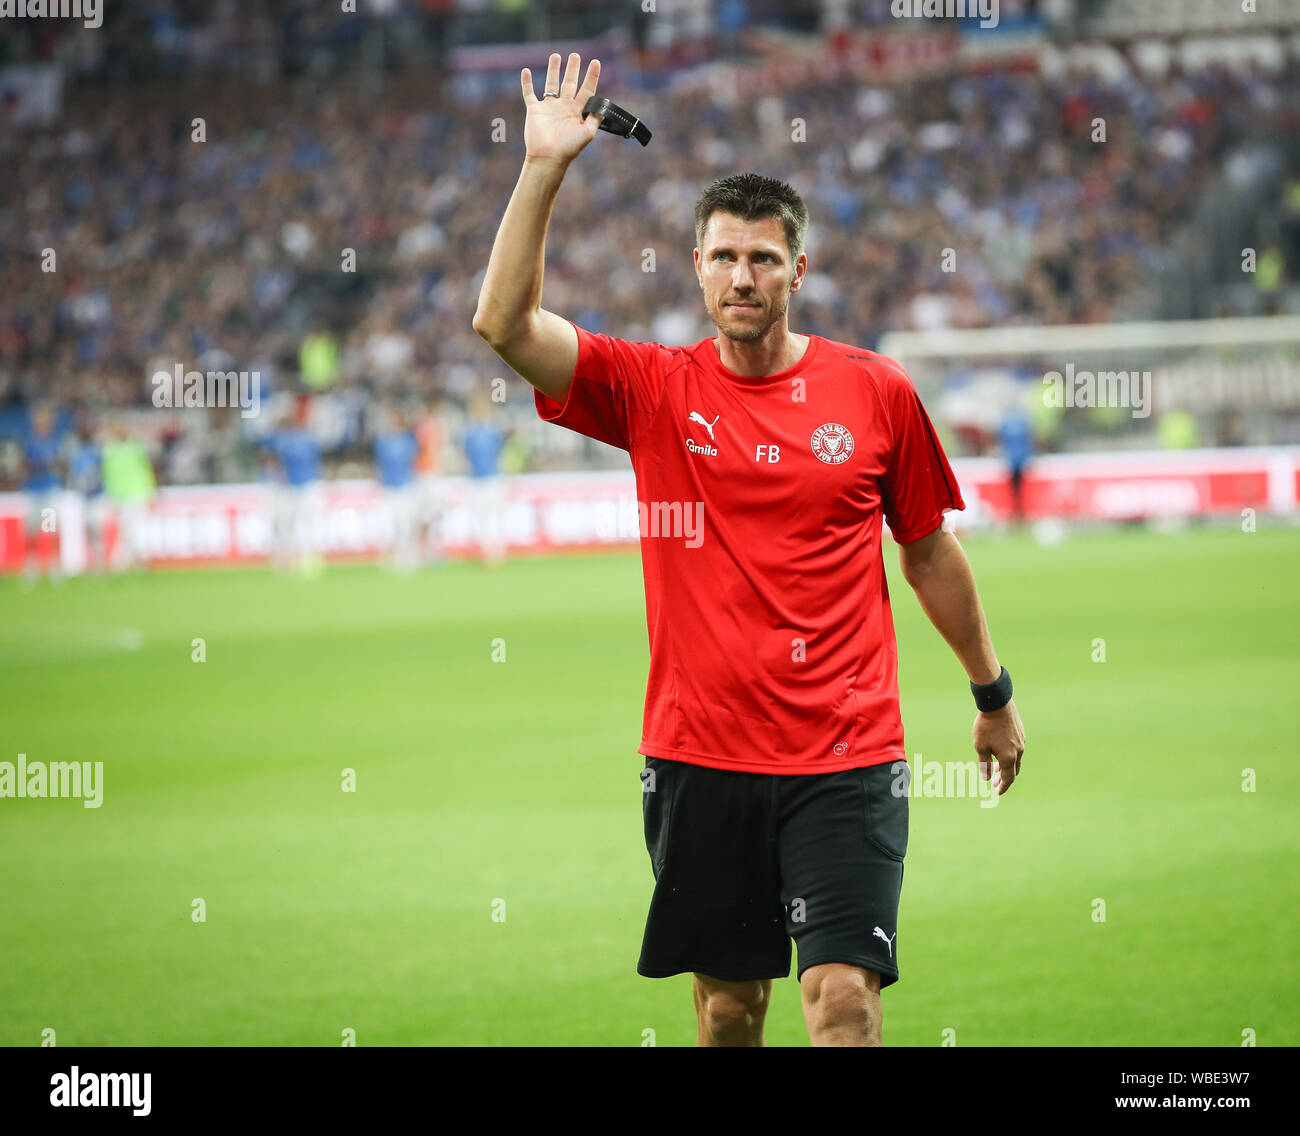 Hamburg, Germany. 26th Aug, 2019. Soccer: 2nd Bundesliga, 4th matchday, FC St. Pauli - Holstein Kiel in Millerntor Stadium. Kiel's assistant coach Fabian Boll waves on the pitch. Credit: Christian Charisius/dpa - IMPORTANT NOTE: In accordance with the requirements of the DFL Deutsche Fußball Liga or the DFB Deutscher Fußball-Bund, it is prohibited to use or have used photographs taken in the stadium and/or the match in the form of sequence images and/or video-like photo sequences./dpa/Alamy Live News Stock Photo